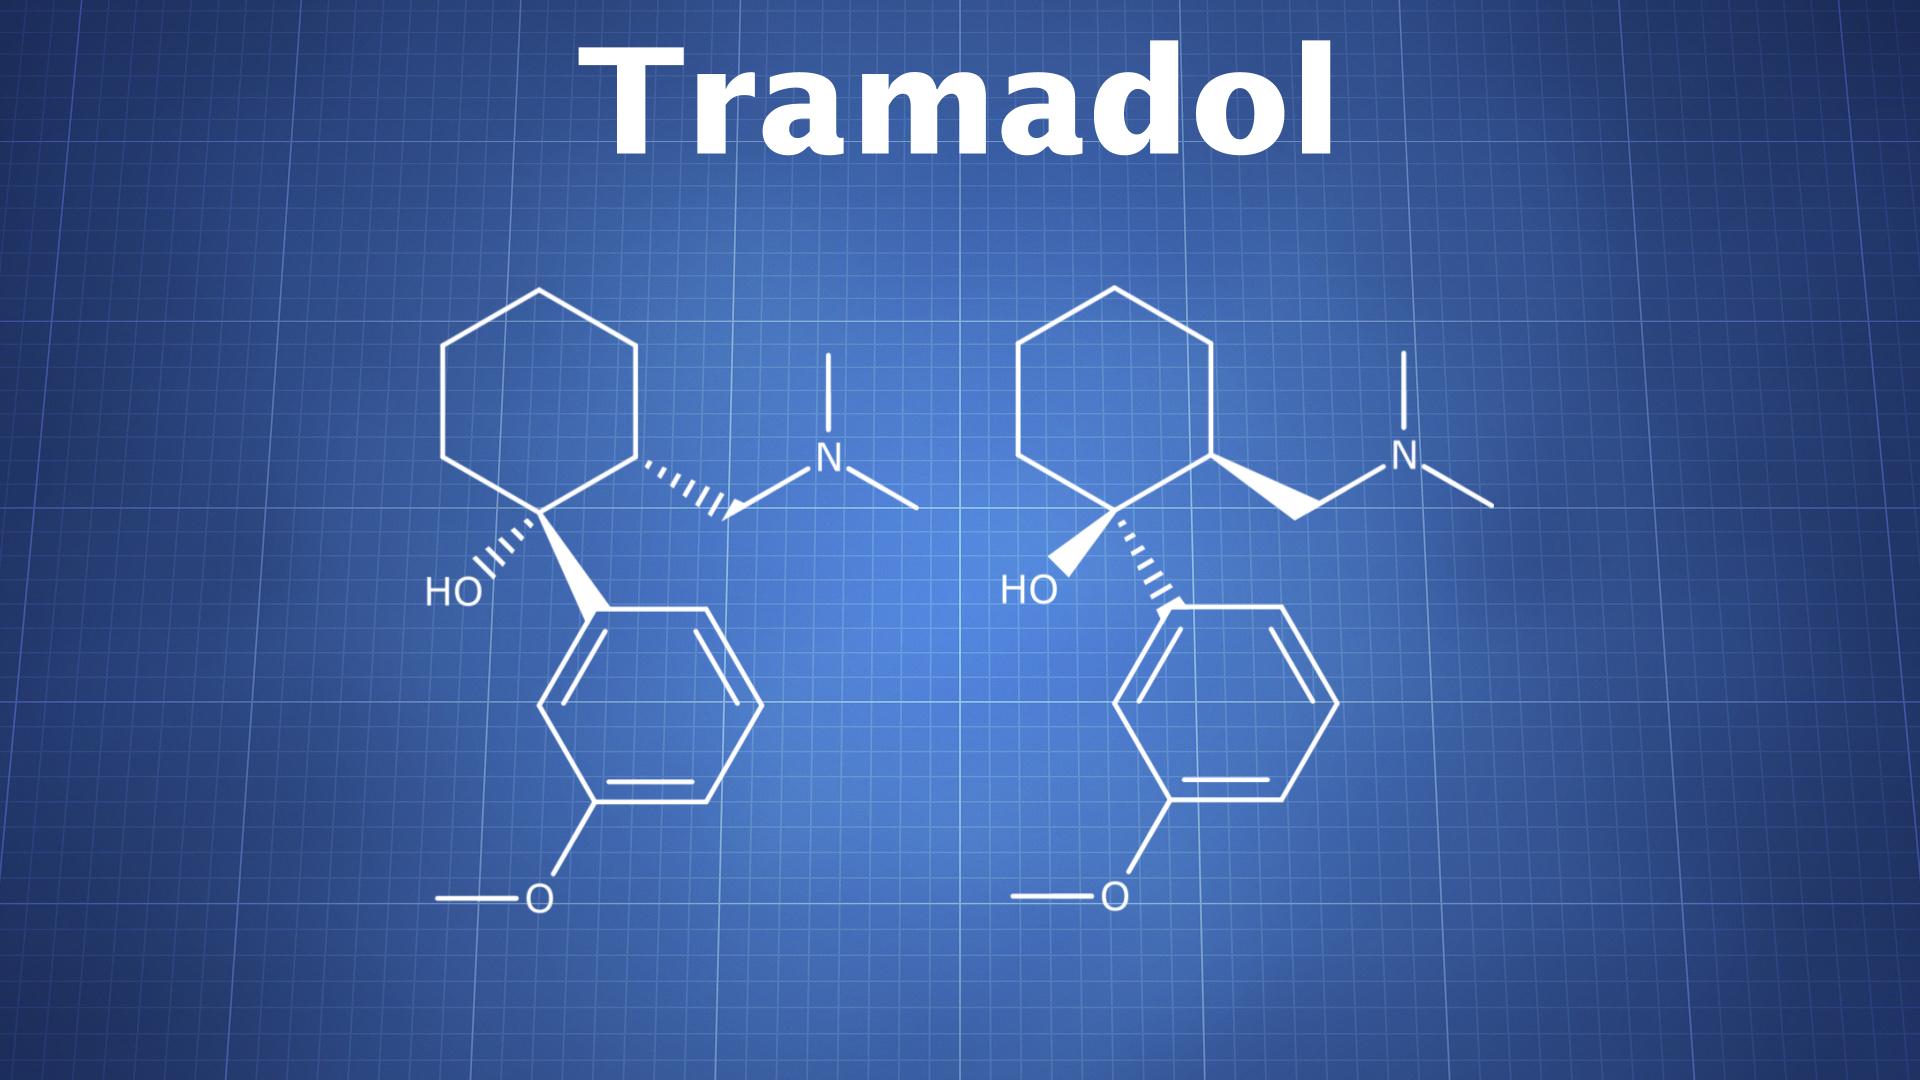 Take together tramadol you can fentanyl and